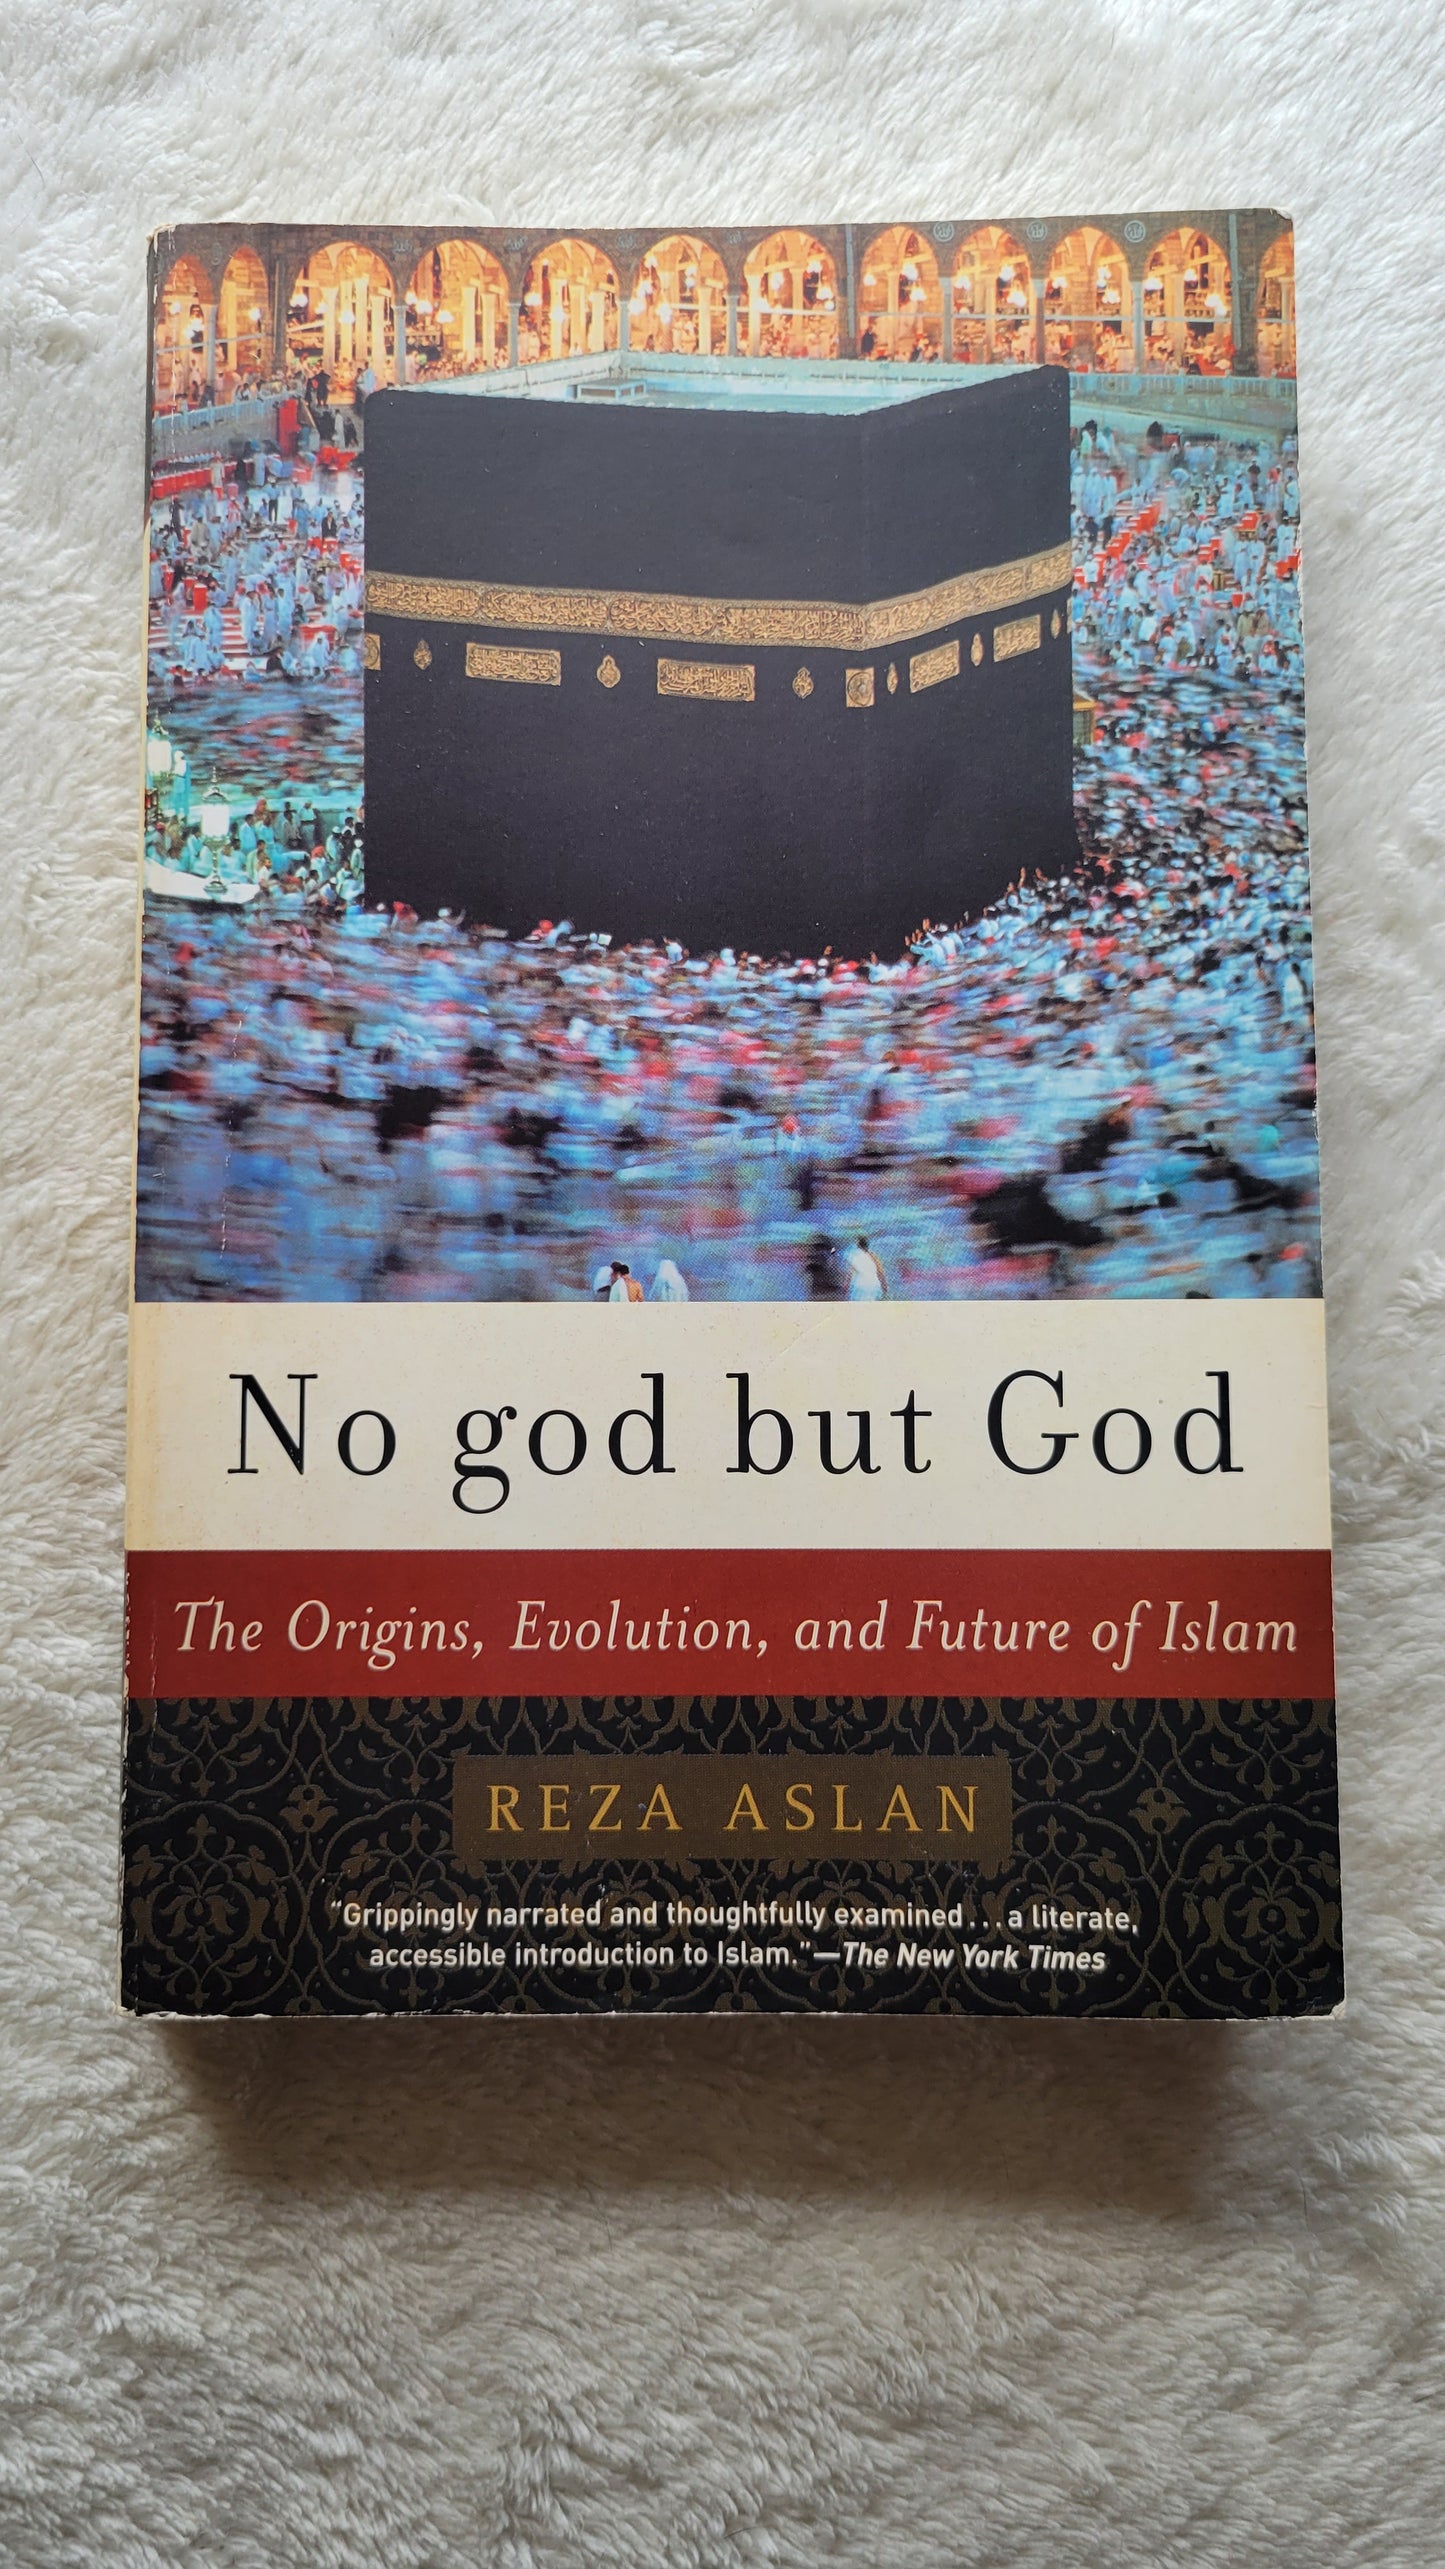 Used book for sale, "No god but God: The Origins, Evolution, and Future of Islam" by Reza Aslan, Random House publishers, 2006. View of front cover.